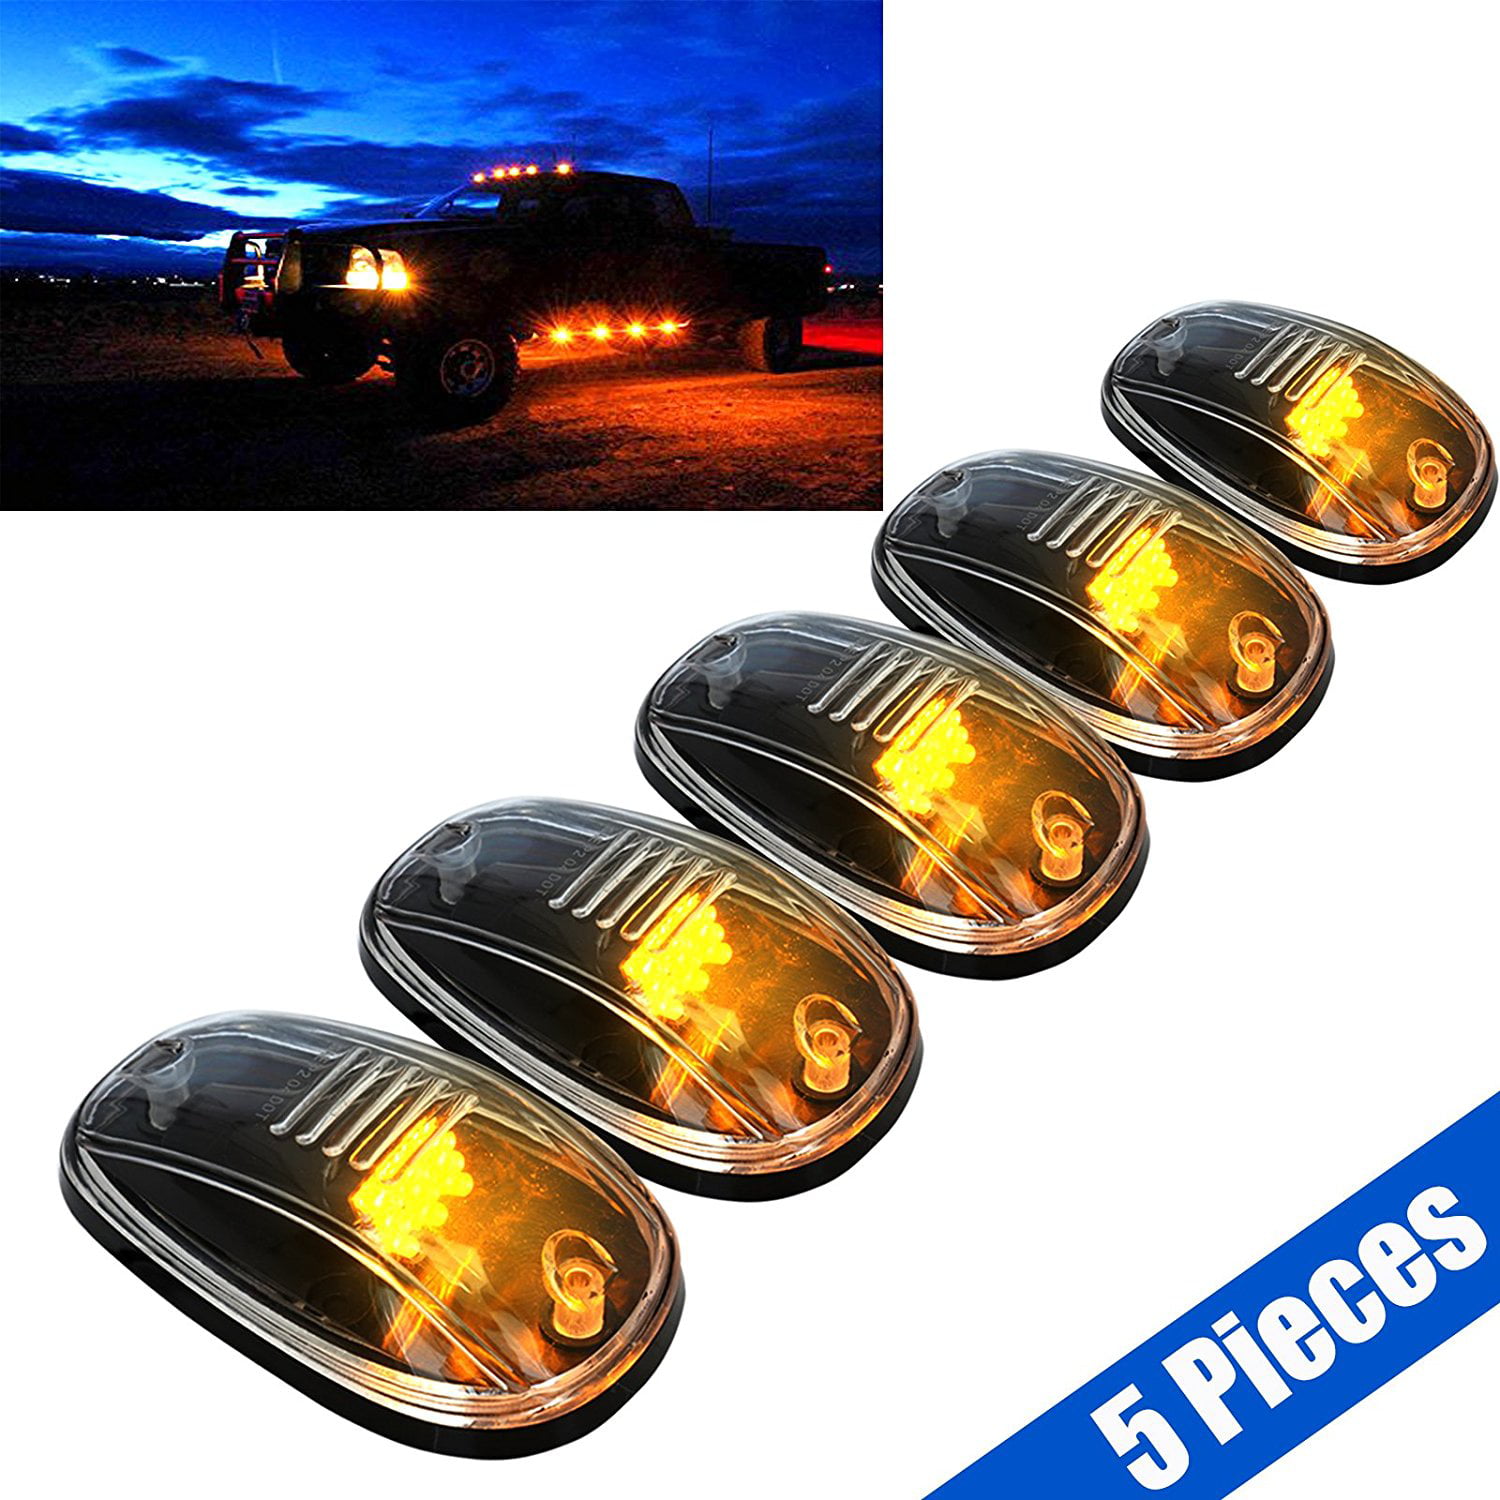 5pcs Clear LED Roof Top Truck SUV Cab Marker Running Clearance Lights Set Kit